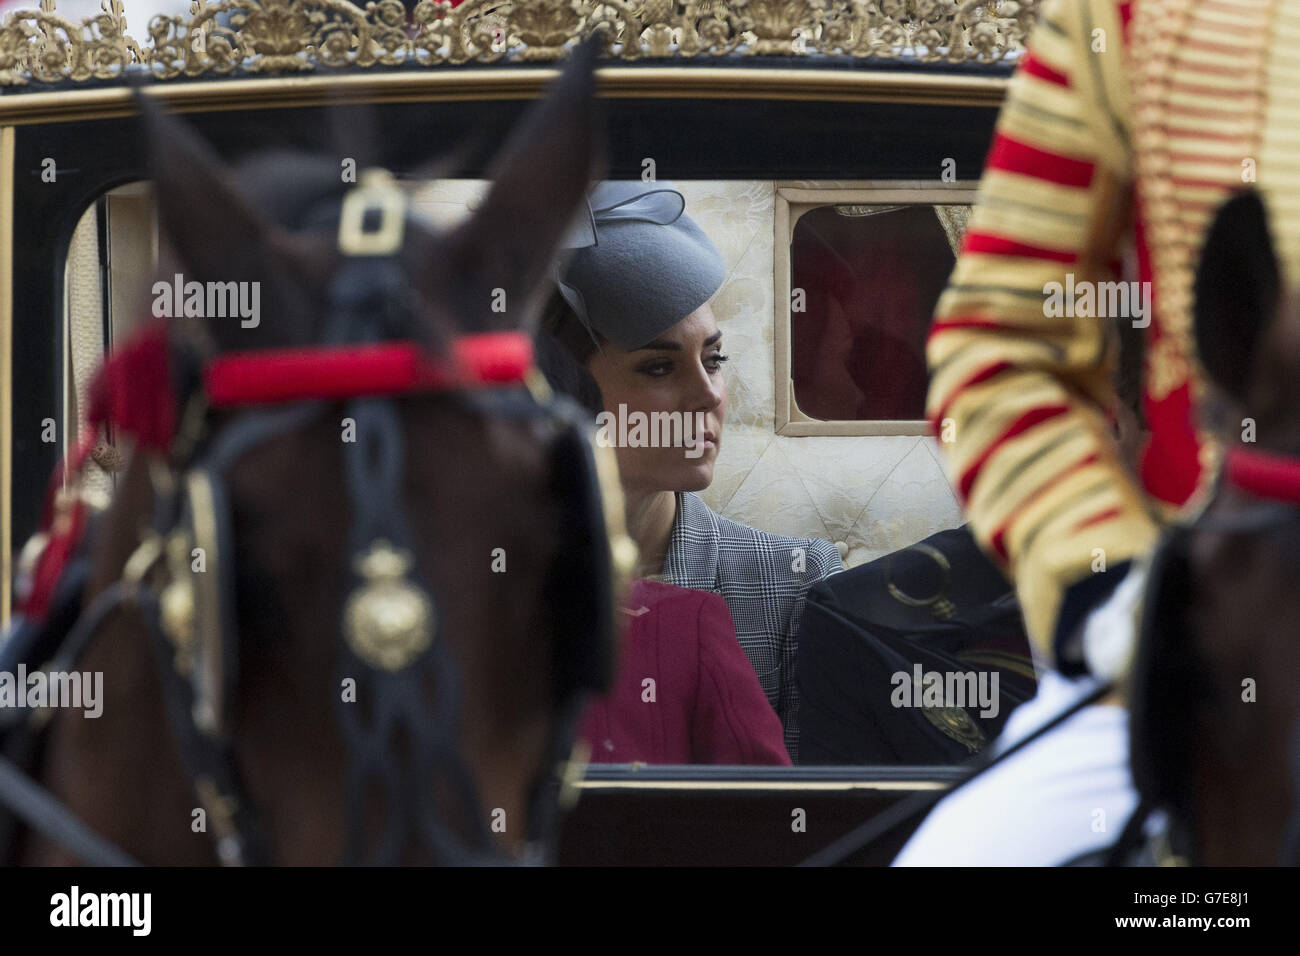 The Duke and Duchess (right) of Cambridge with Singapore's Grace Fu Hai Yien, a Minister in the Singapore Prime Minister's Office, Second Minister for the Environment and Water Resources and Second Minister for Foreign Affairs as they arrive in a horse-drawn carriage at Buckingham Palace in London on the first of a four day state visit to Britain by the President of Singapore Tony Tan Keng Yam. Stock Photo